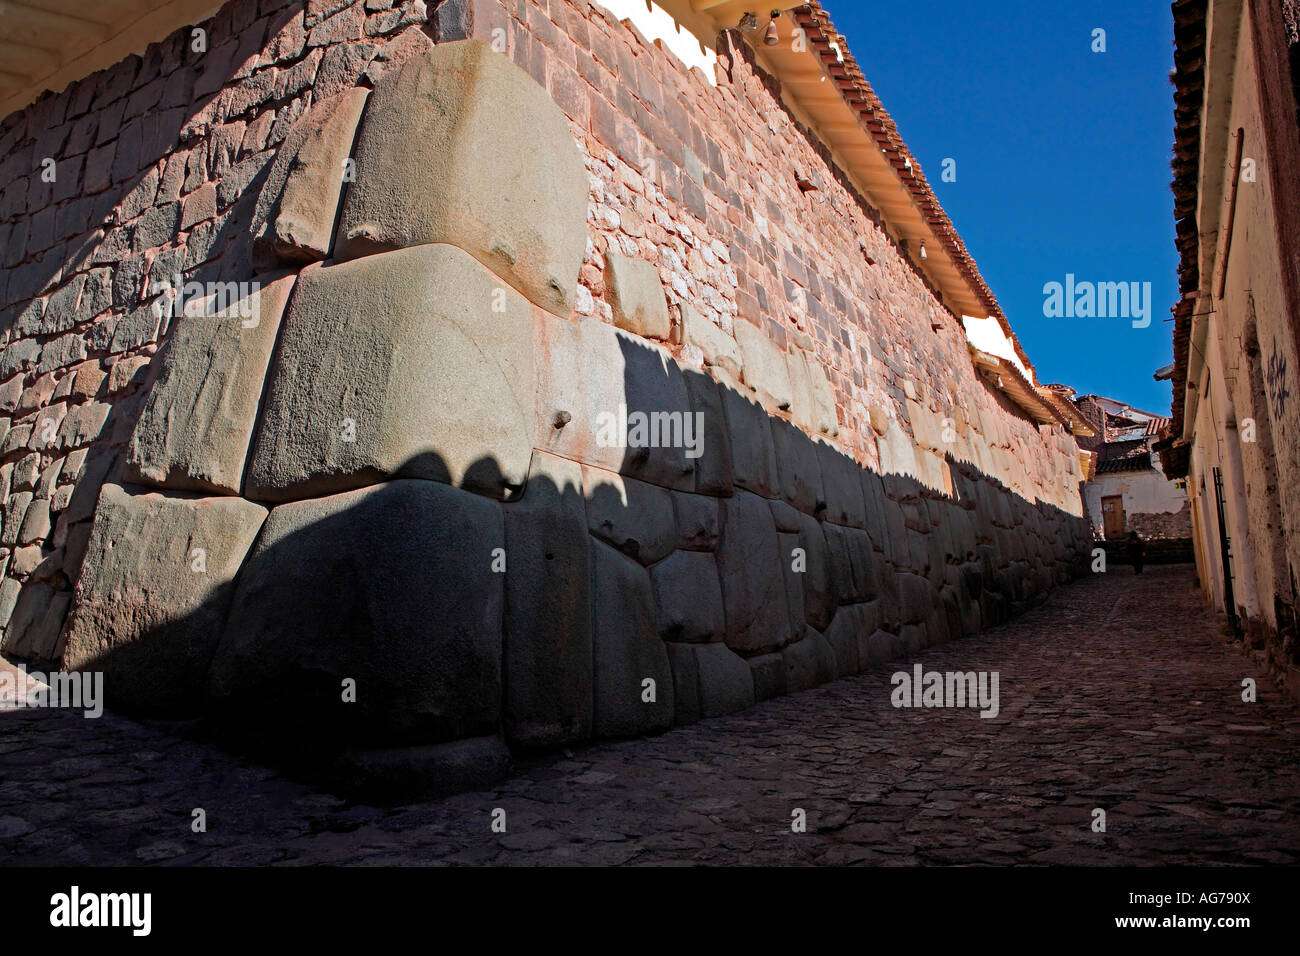 foundations of the former 14th century Palace of the Incan Ruler Inca Roca, Calle Hatun Rumiyoc, Cuzco, Peru Stock Photo